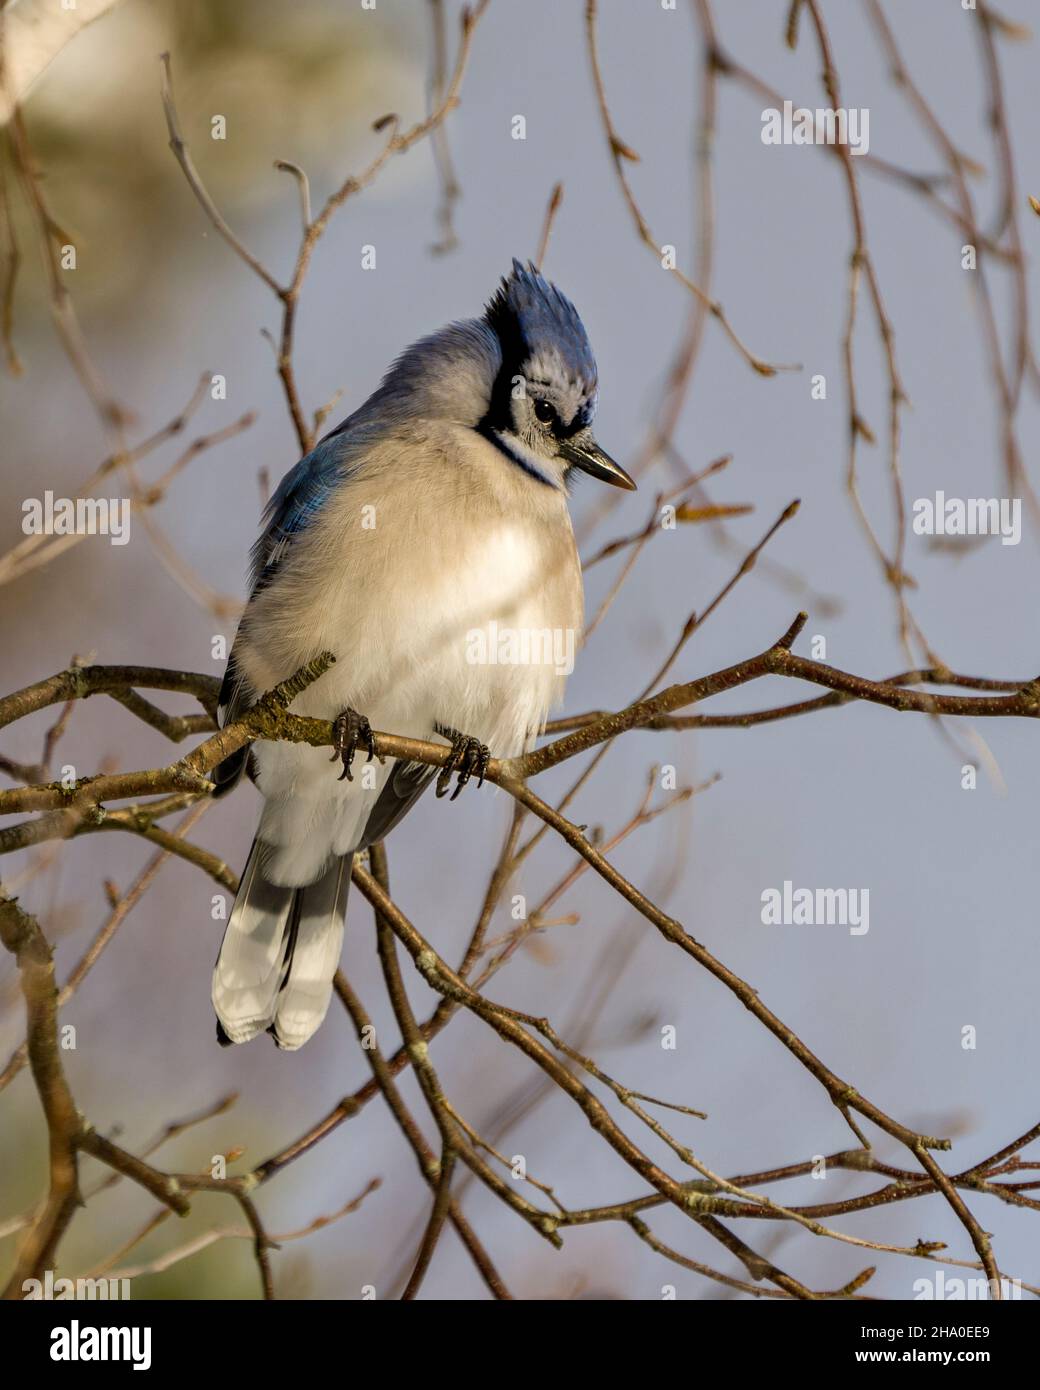 Blue Jay bird close-up view perched in the winter season with blur blue sky and branches background in its environment and habitat surrounding. Stock Photo